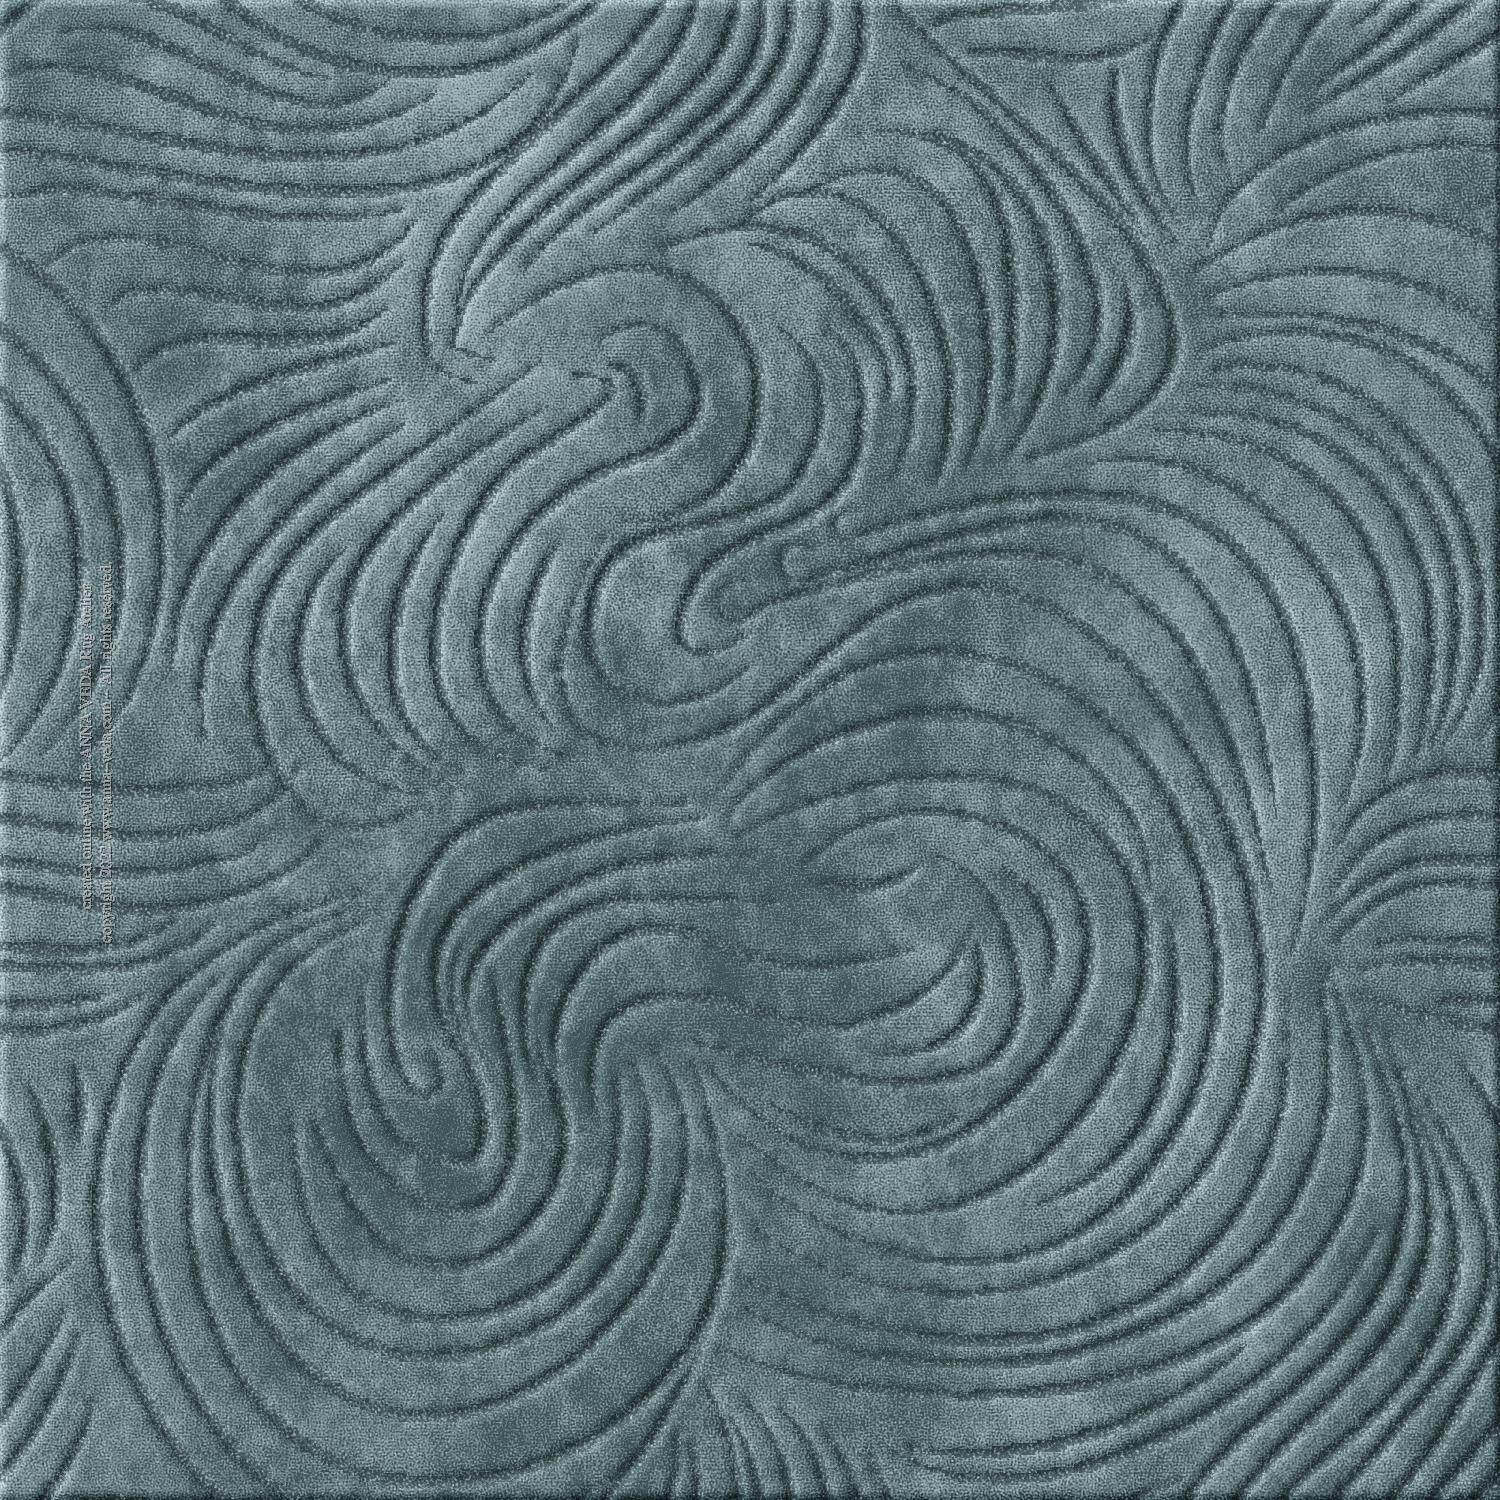 inspire 6557-springs - handmade rug, woven knot (India), 25x35 3ply quality